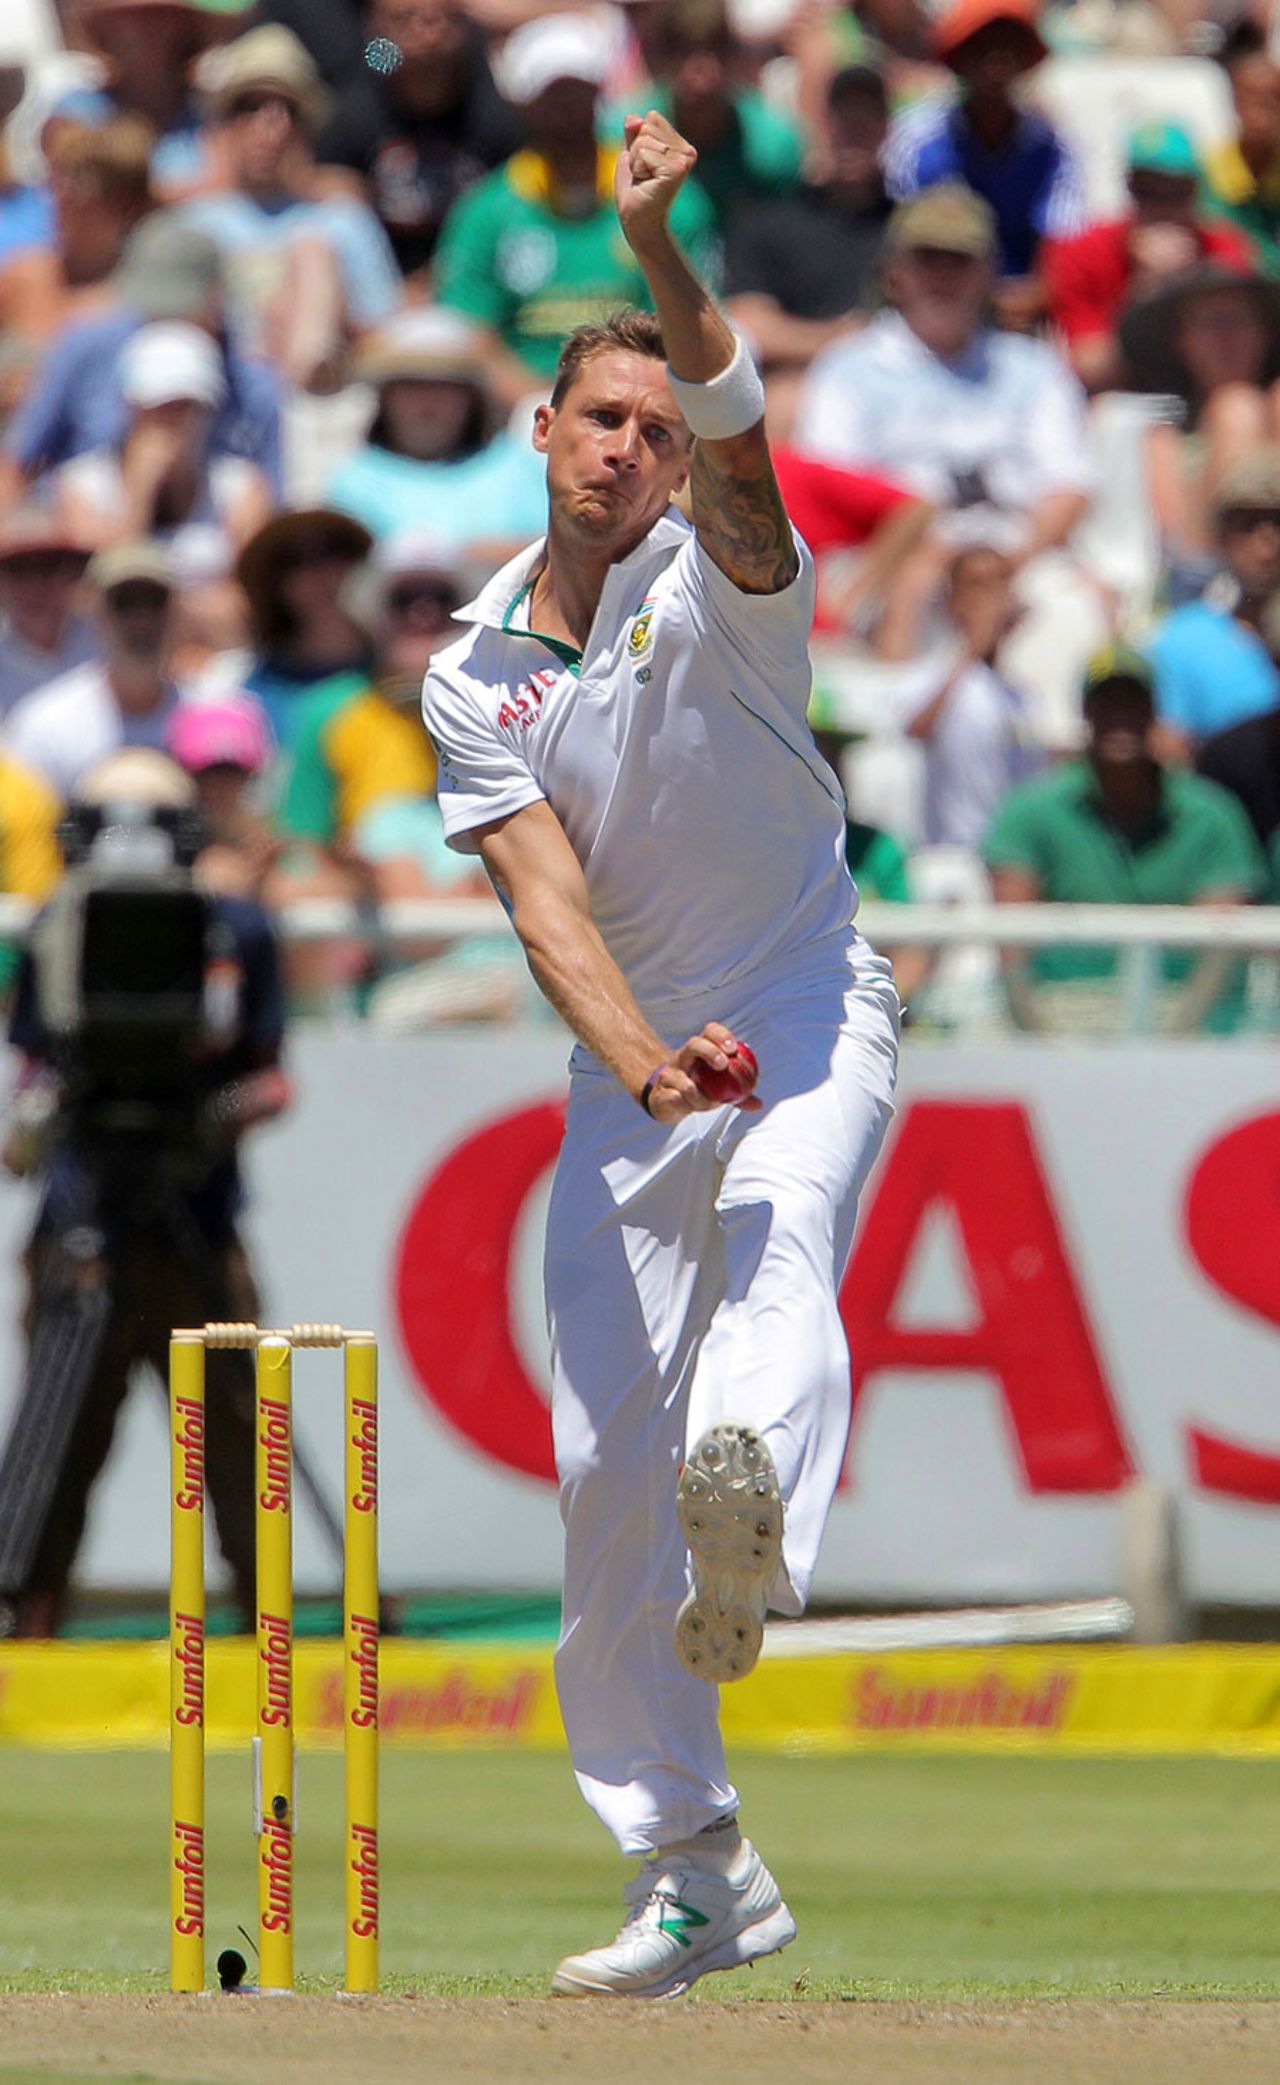 Dale Steyn bowled Doug Bracewell for his 300th Test wicket, South Africa v New Zealand, 1st Test, Cape Town, 1st day, January 2, 2013